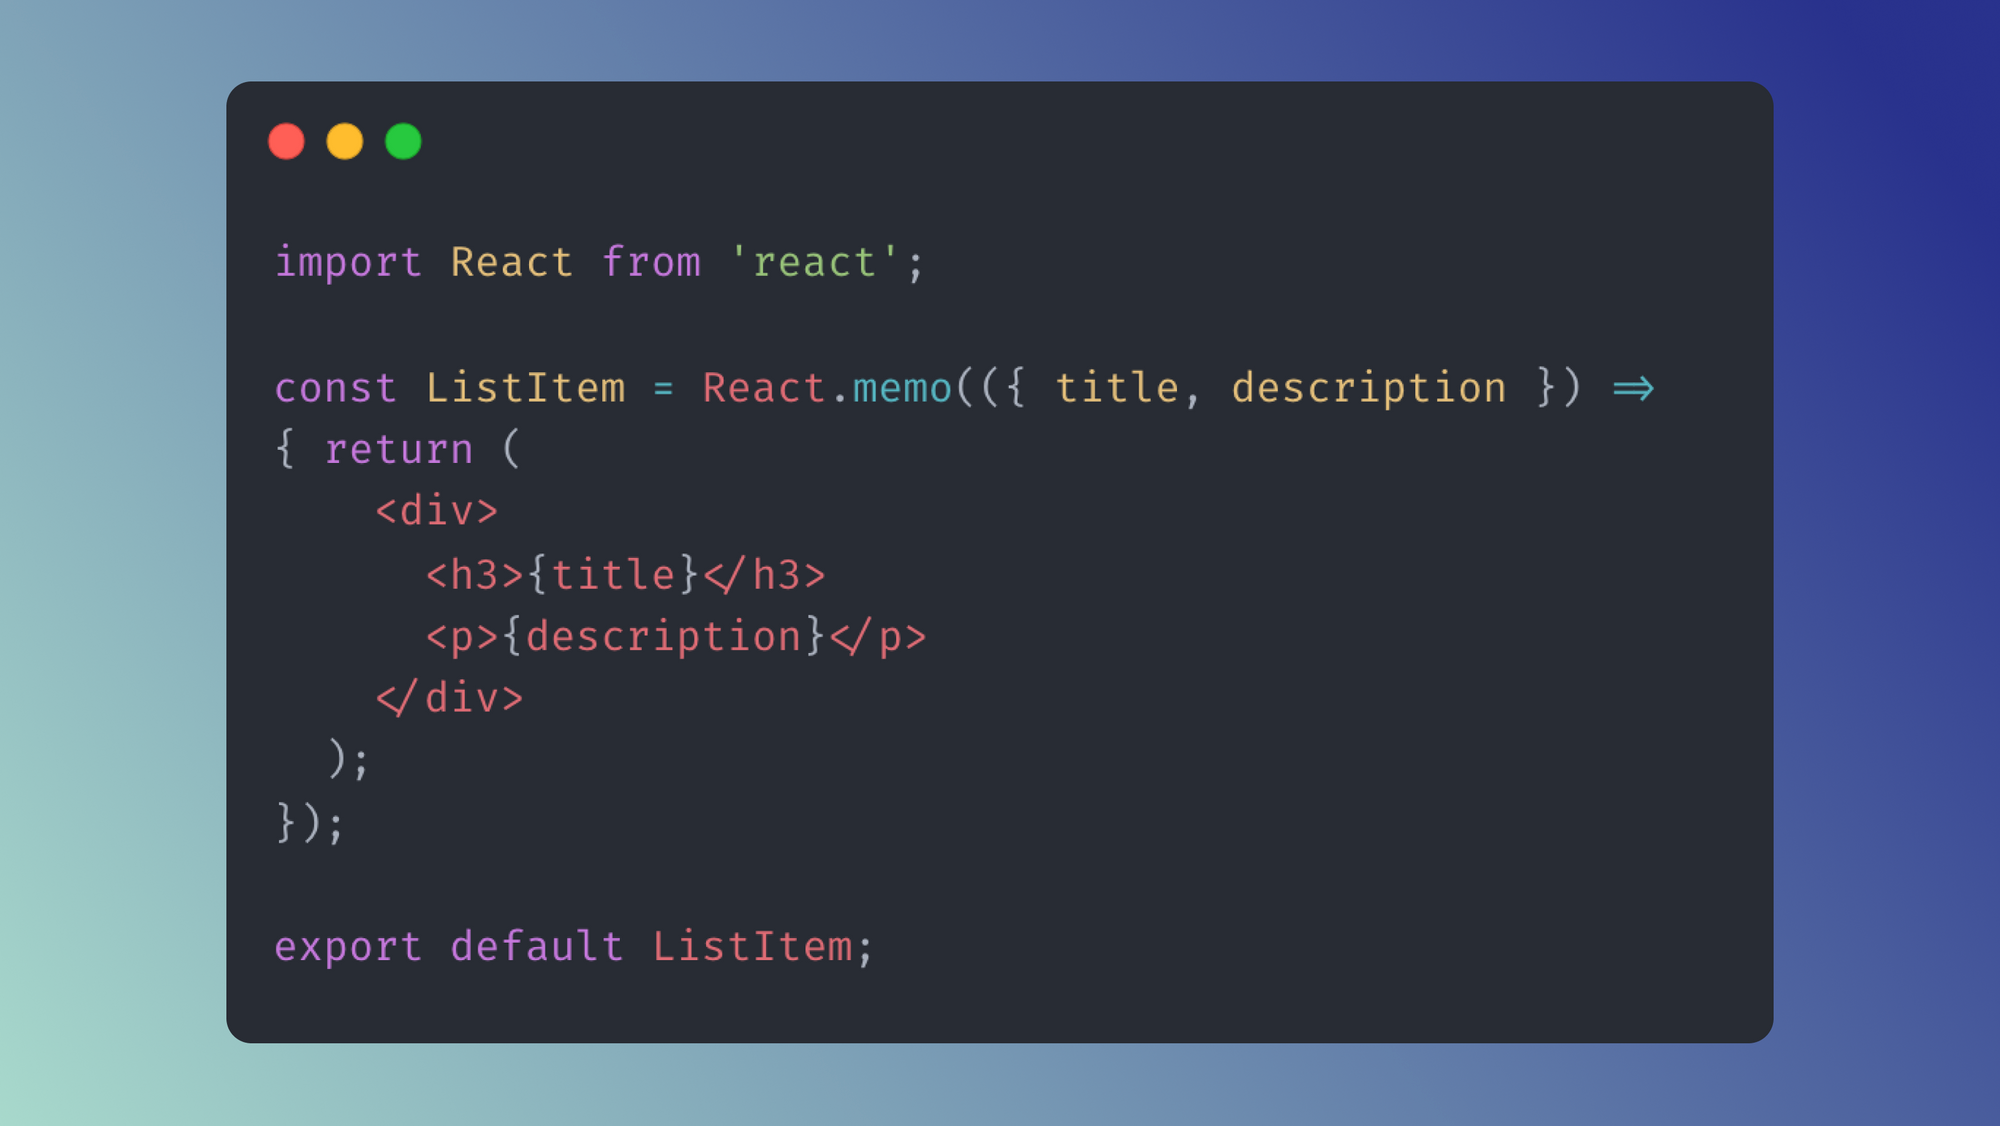 What is React memo and how does it work?